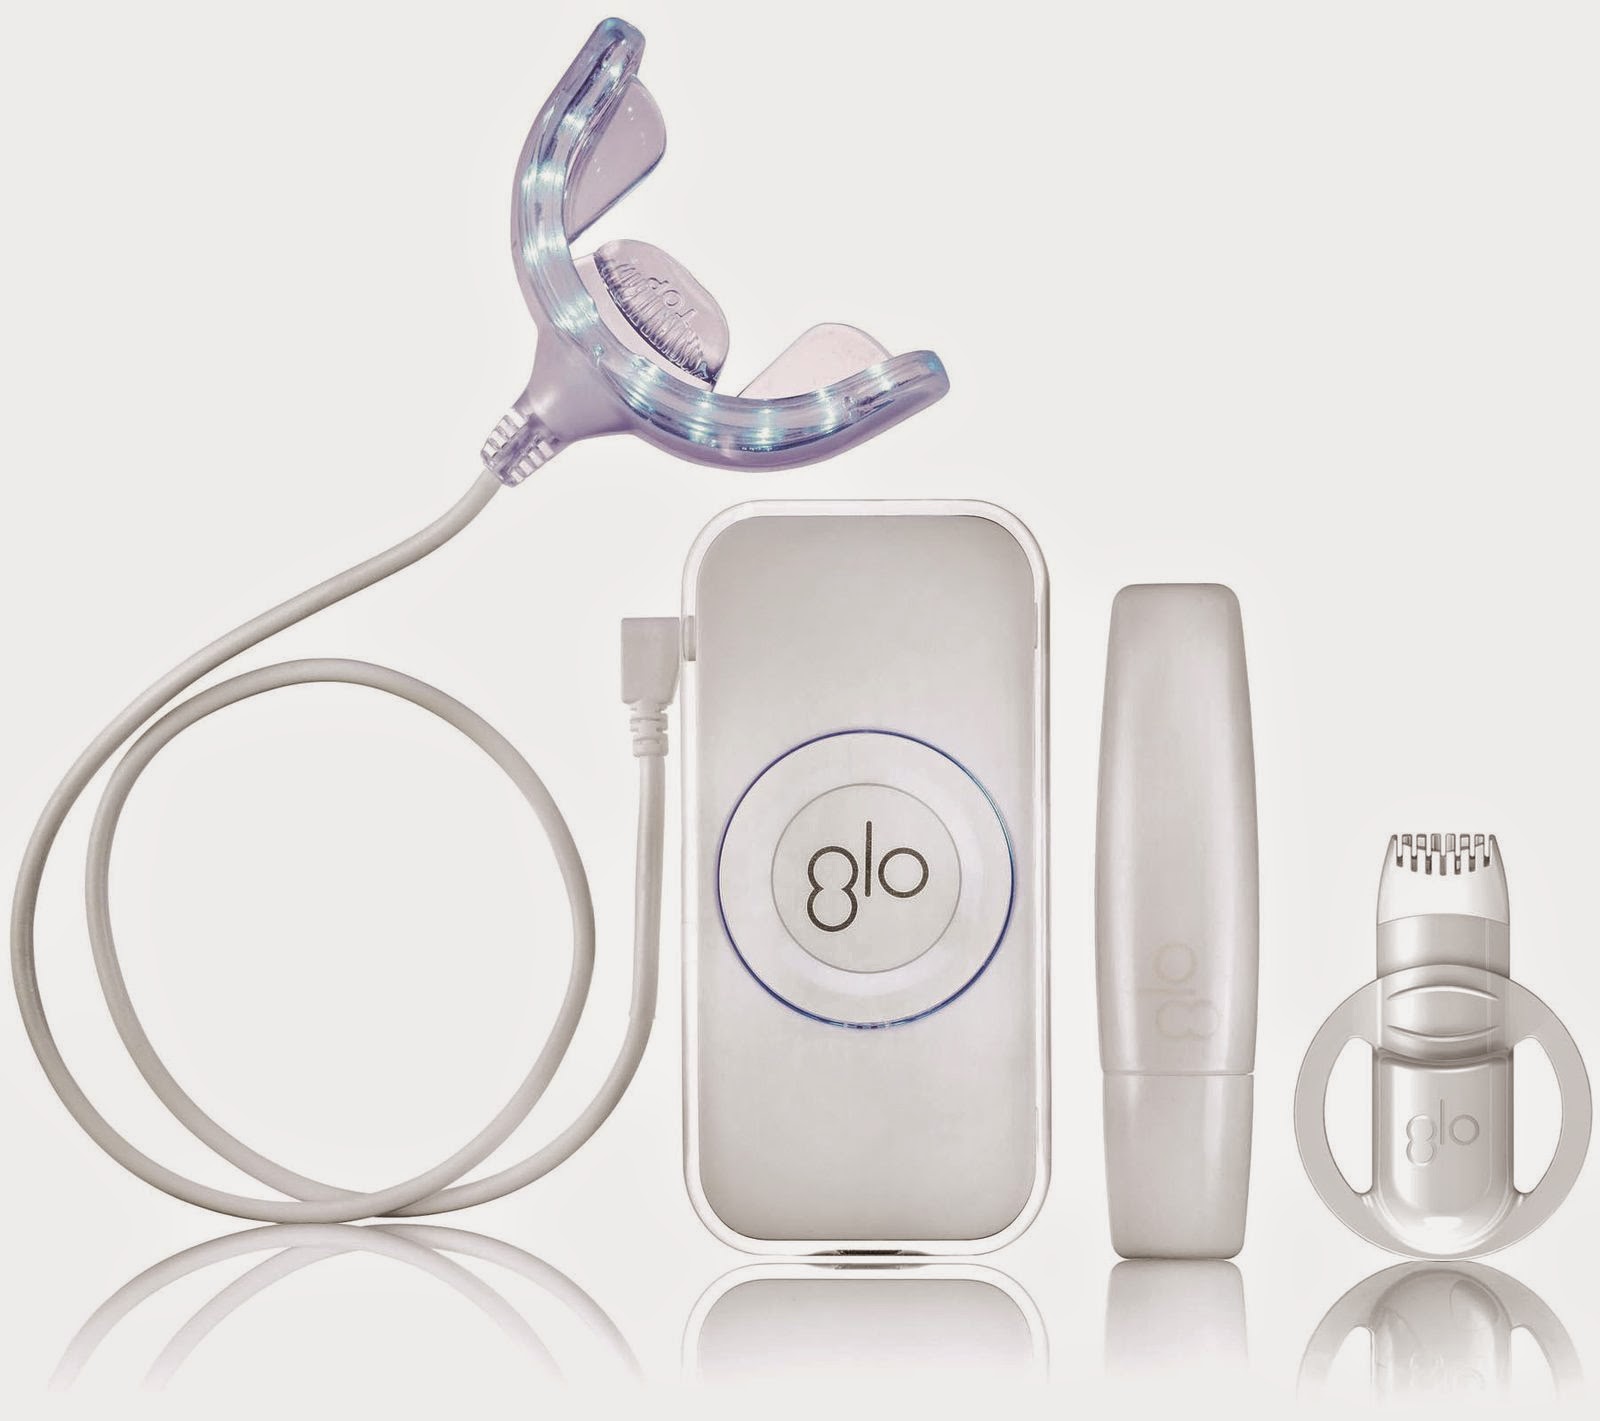 Brighten Up w/ the GLO Brilliant Personal Teeth Whitening Device - My Life  on (and off) the Guest List